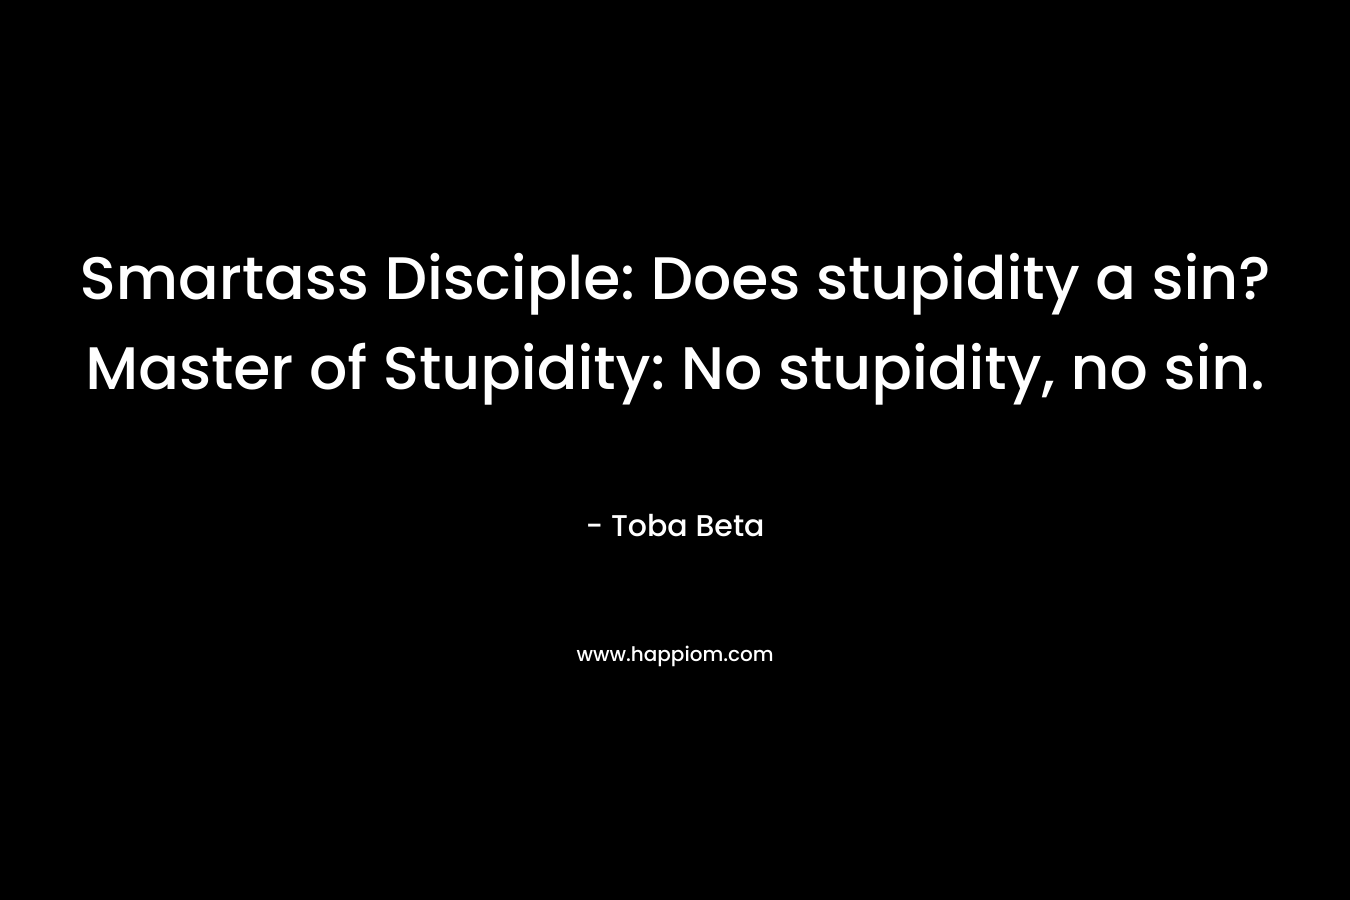 Smartass Disciple: Does stupidity a sin? Master of Stupidity: No stupidity, no sin. – Toba Beta